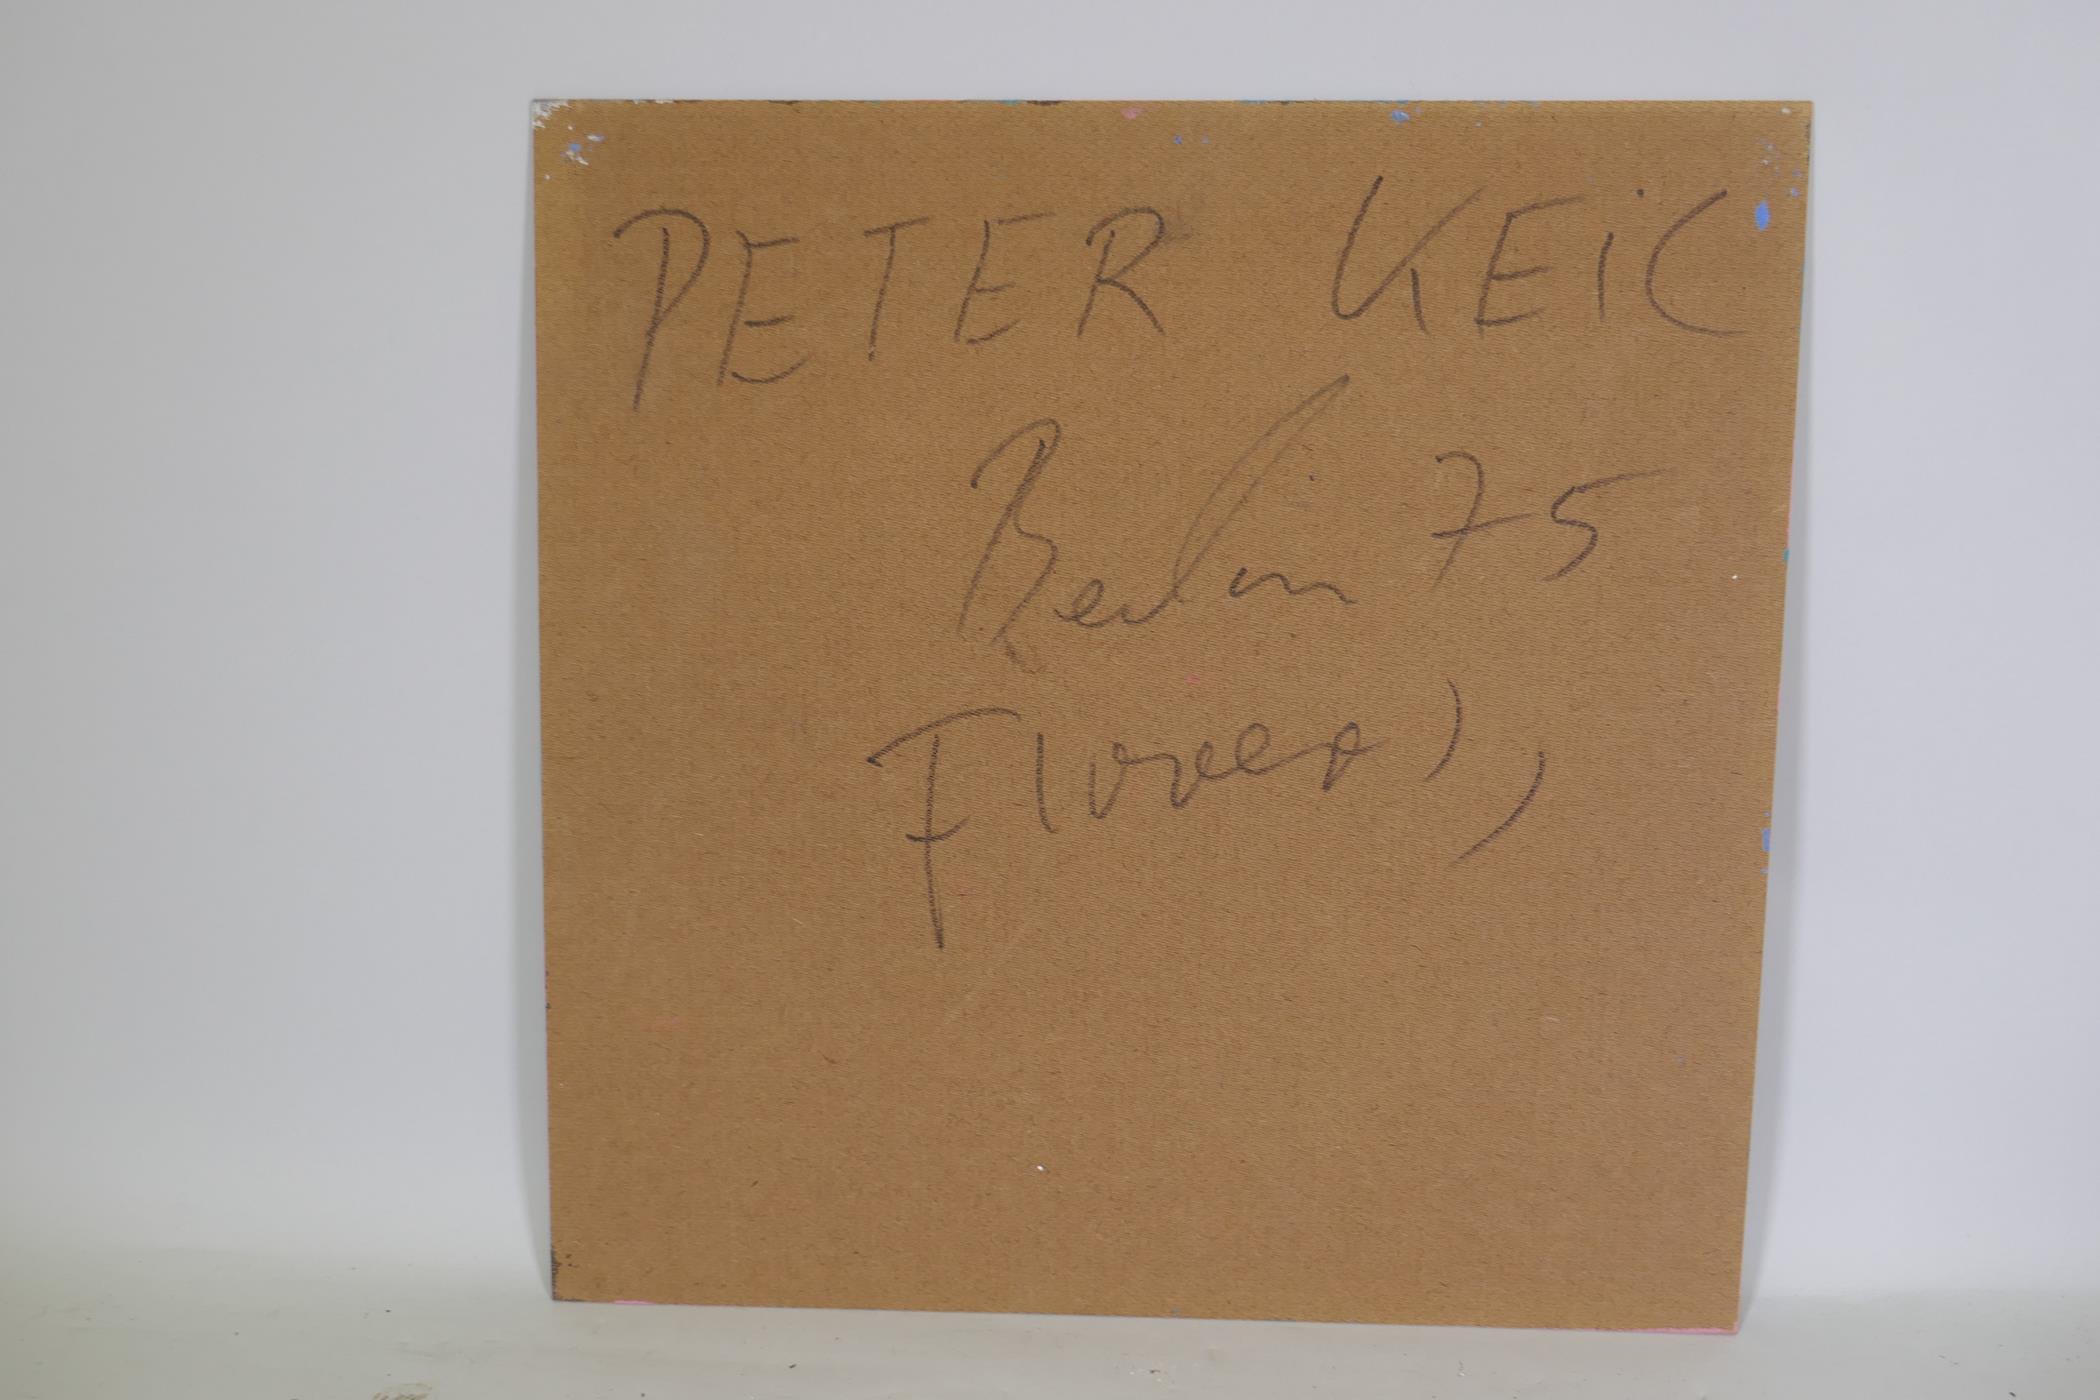 Peter Keil, flowers, signed, inscribed verso, Berlin 1975, oil on board, 61 x 61cm - Image 2 of 2